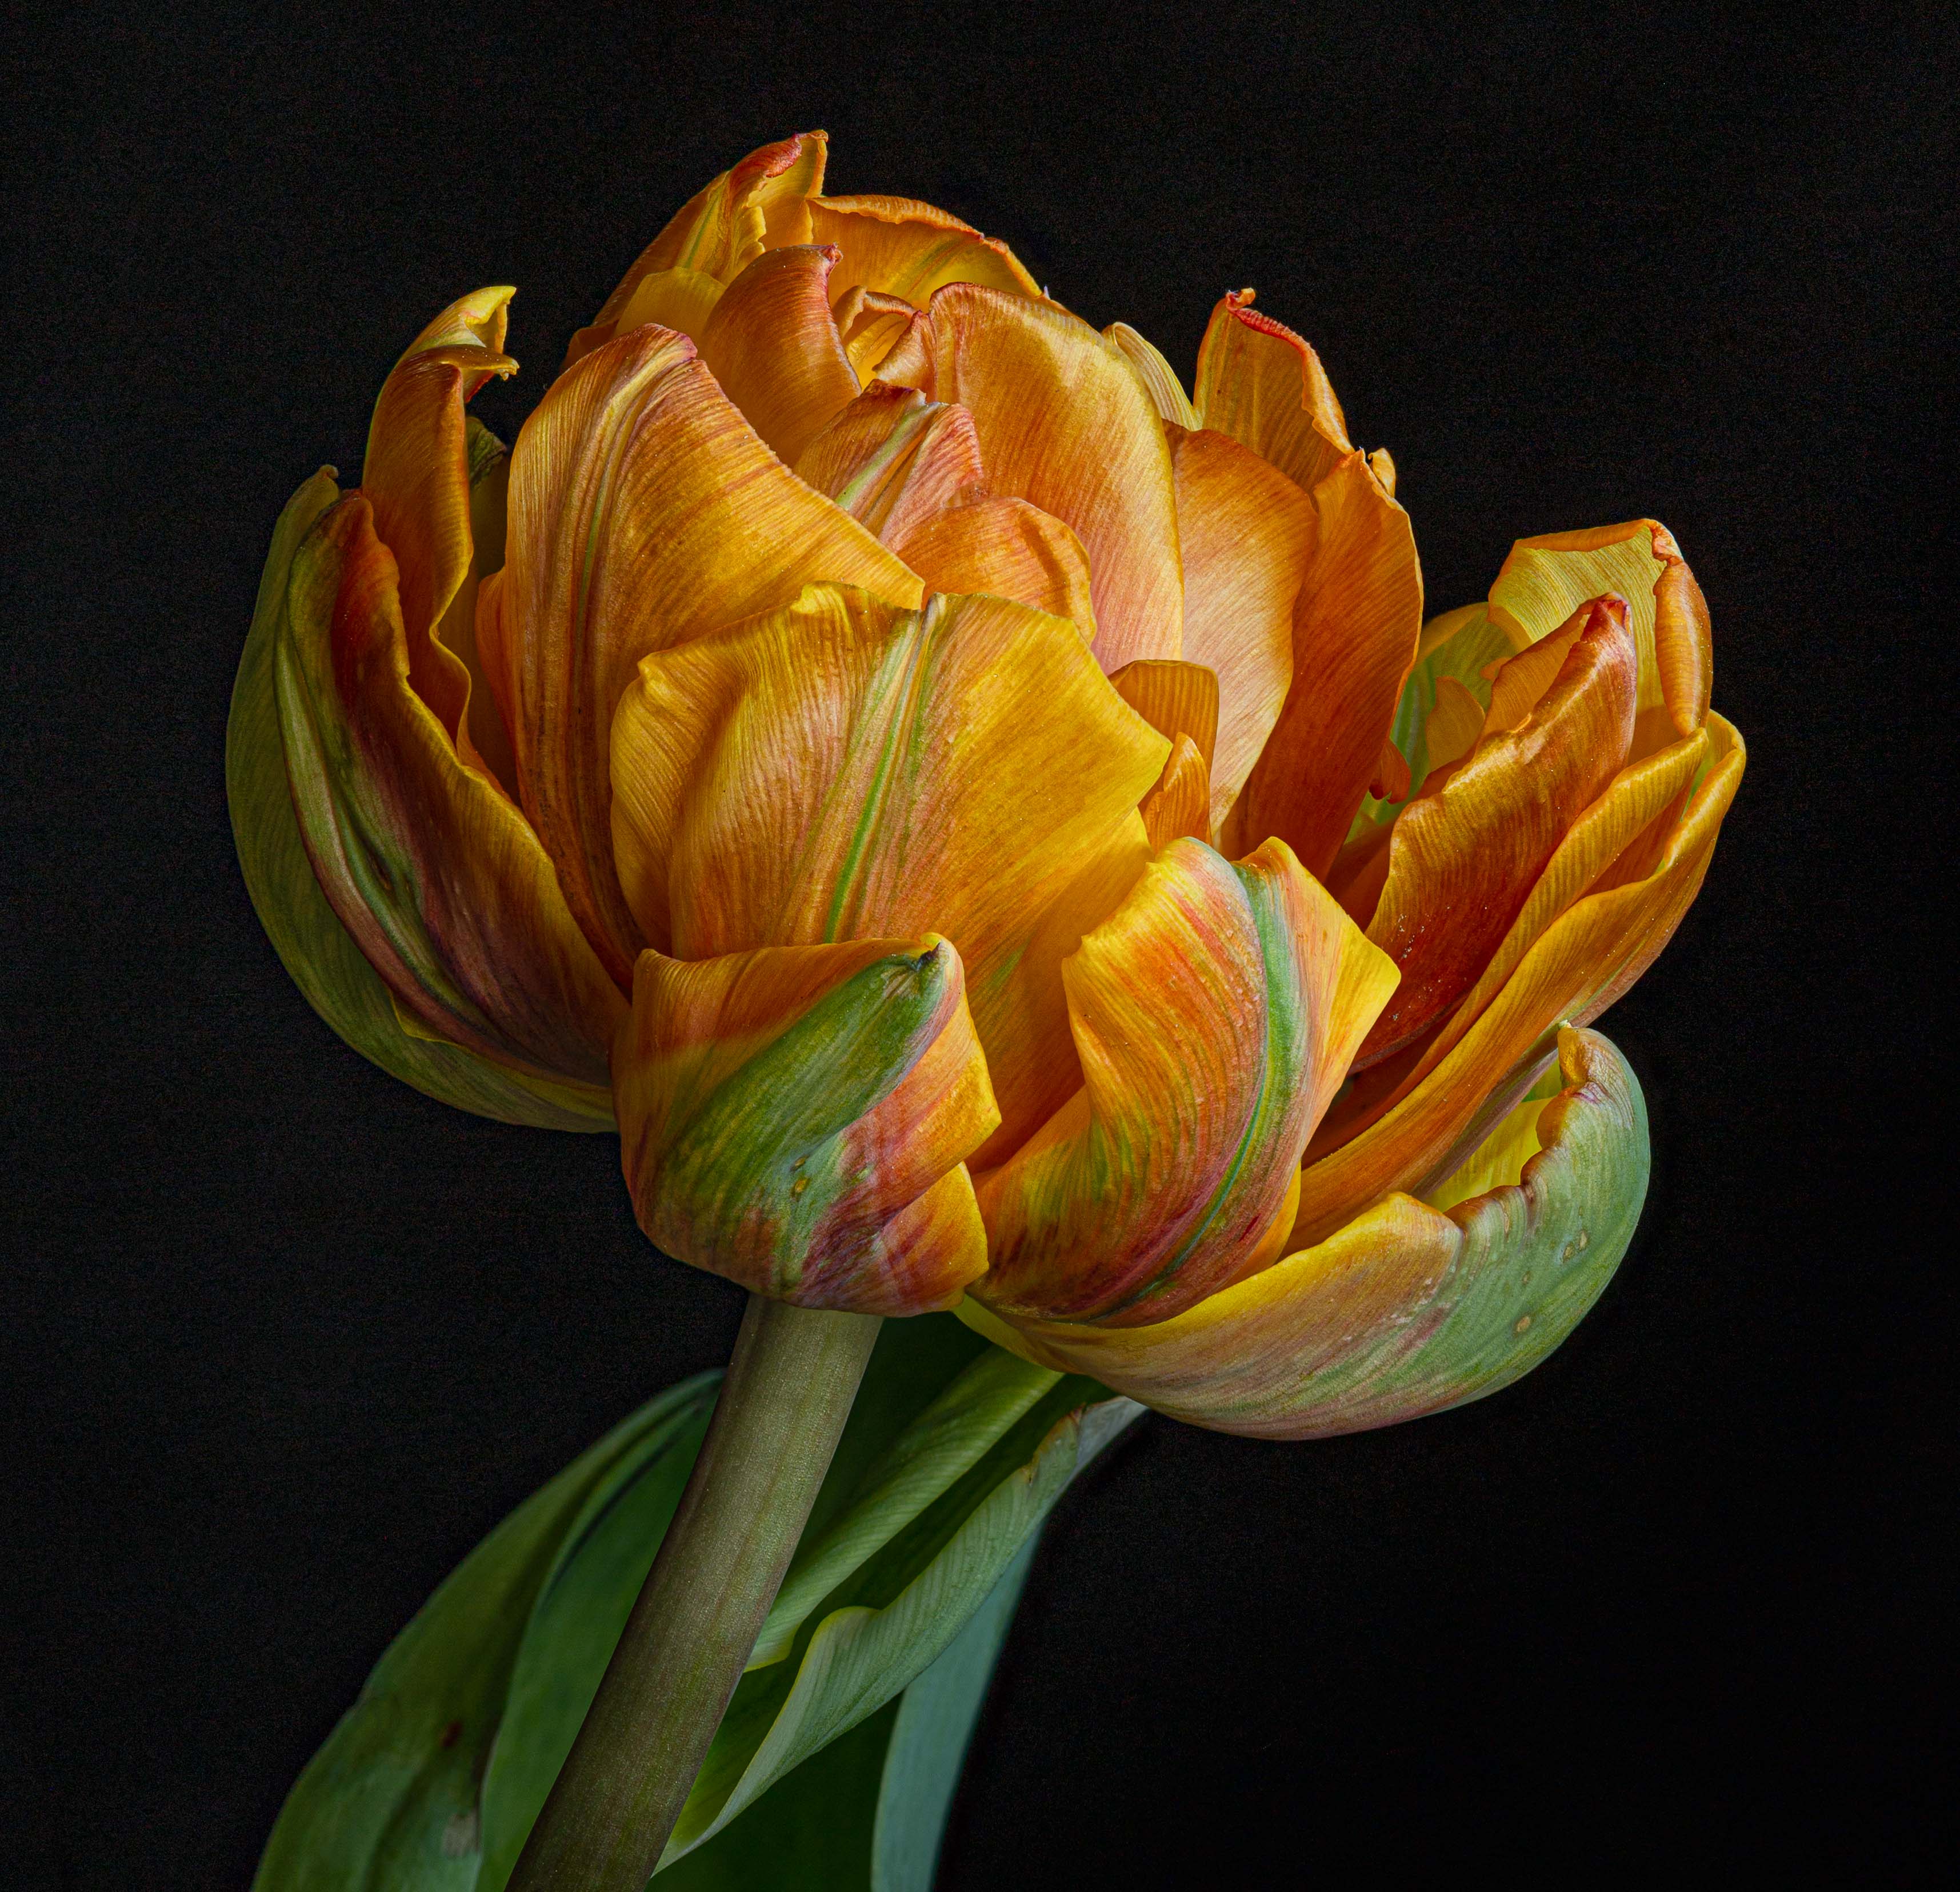 Mature Tulip by Doug Wolters